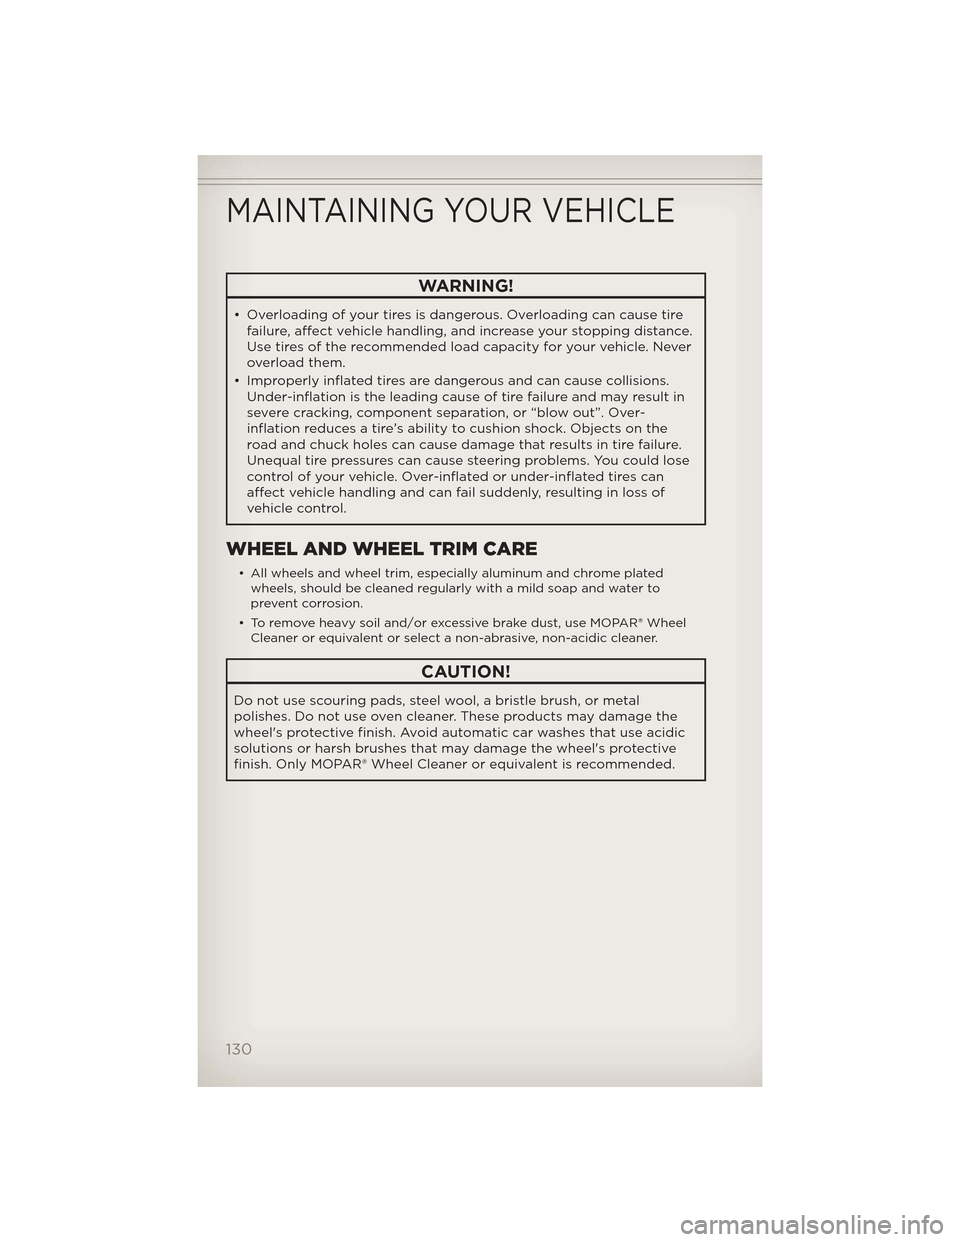 JEEP GRAND CHEROKEE 2012 WK2 / 4.G User Guide WARNING!
• Overloading of your tires is dangerous. Overloading can cause tirefailure, affect vehicle handling, and increase your stopping distance.
Use tires of the recommended load capacity for you